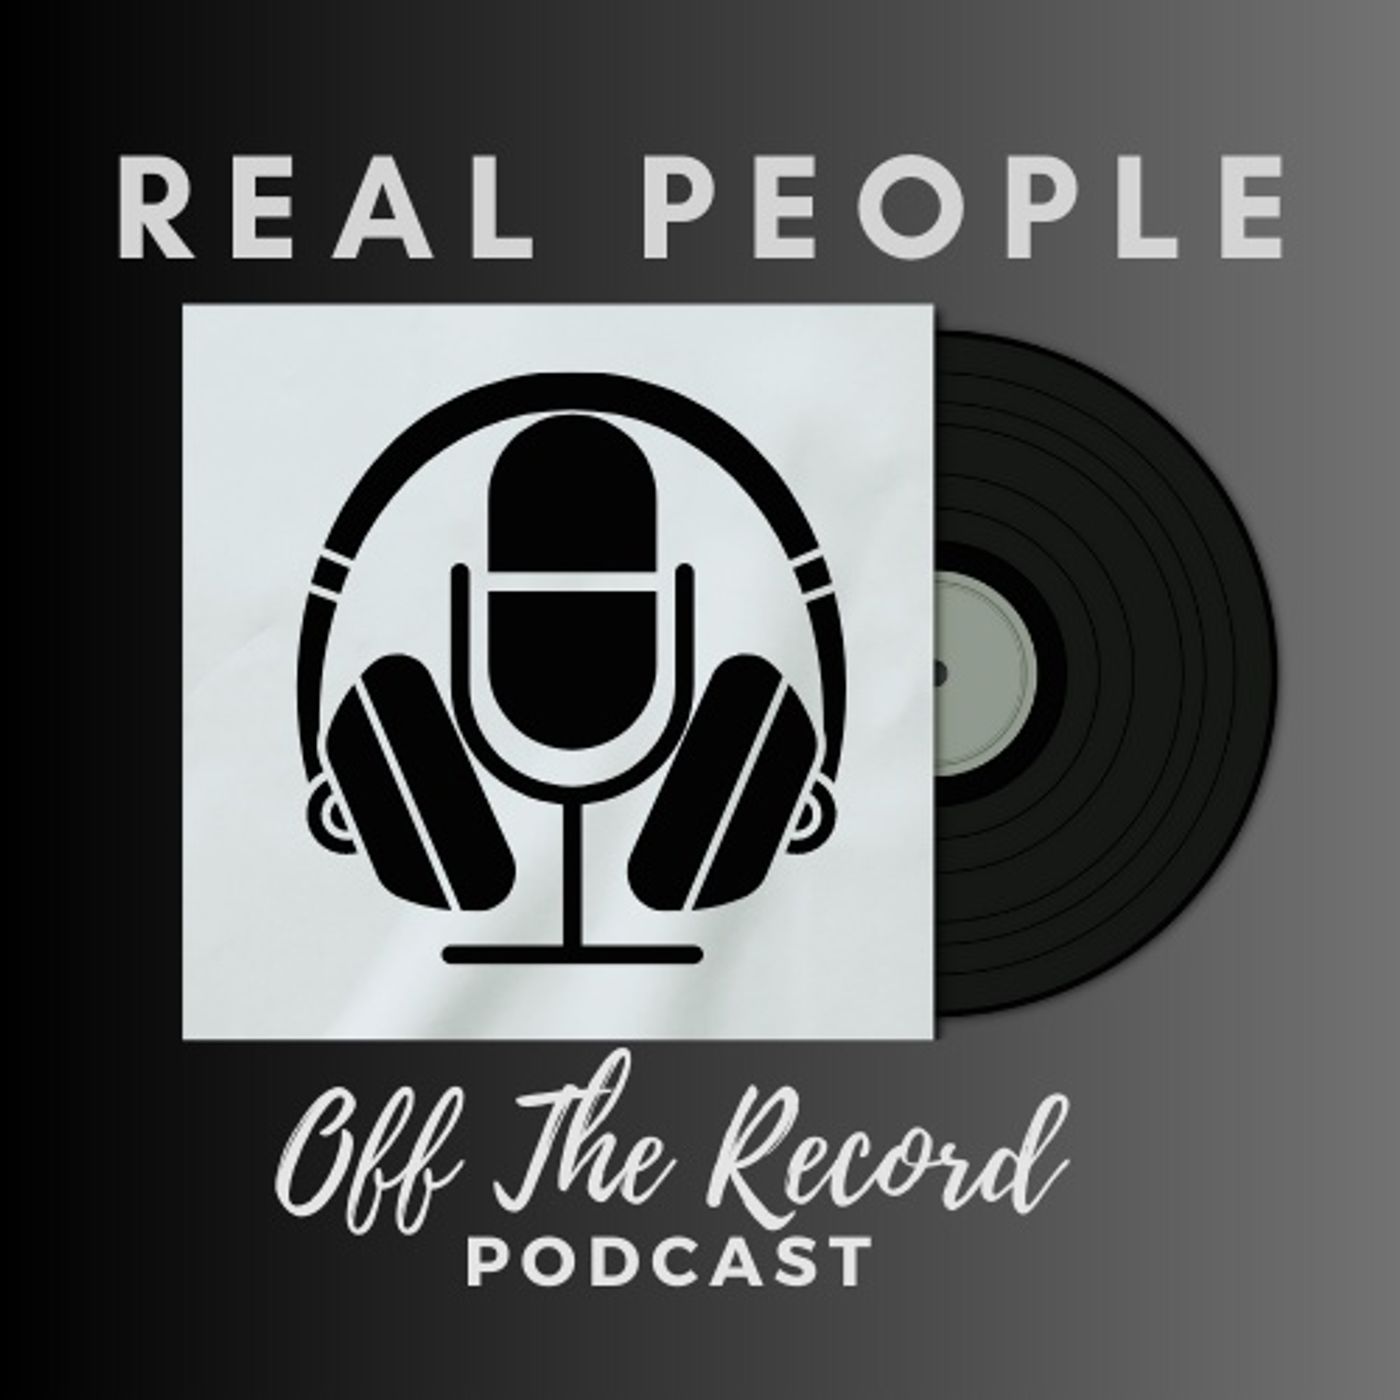 Real People: Off The Record Podcast